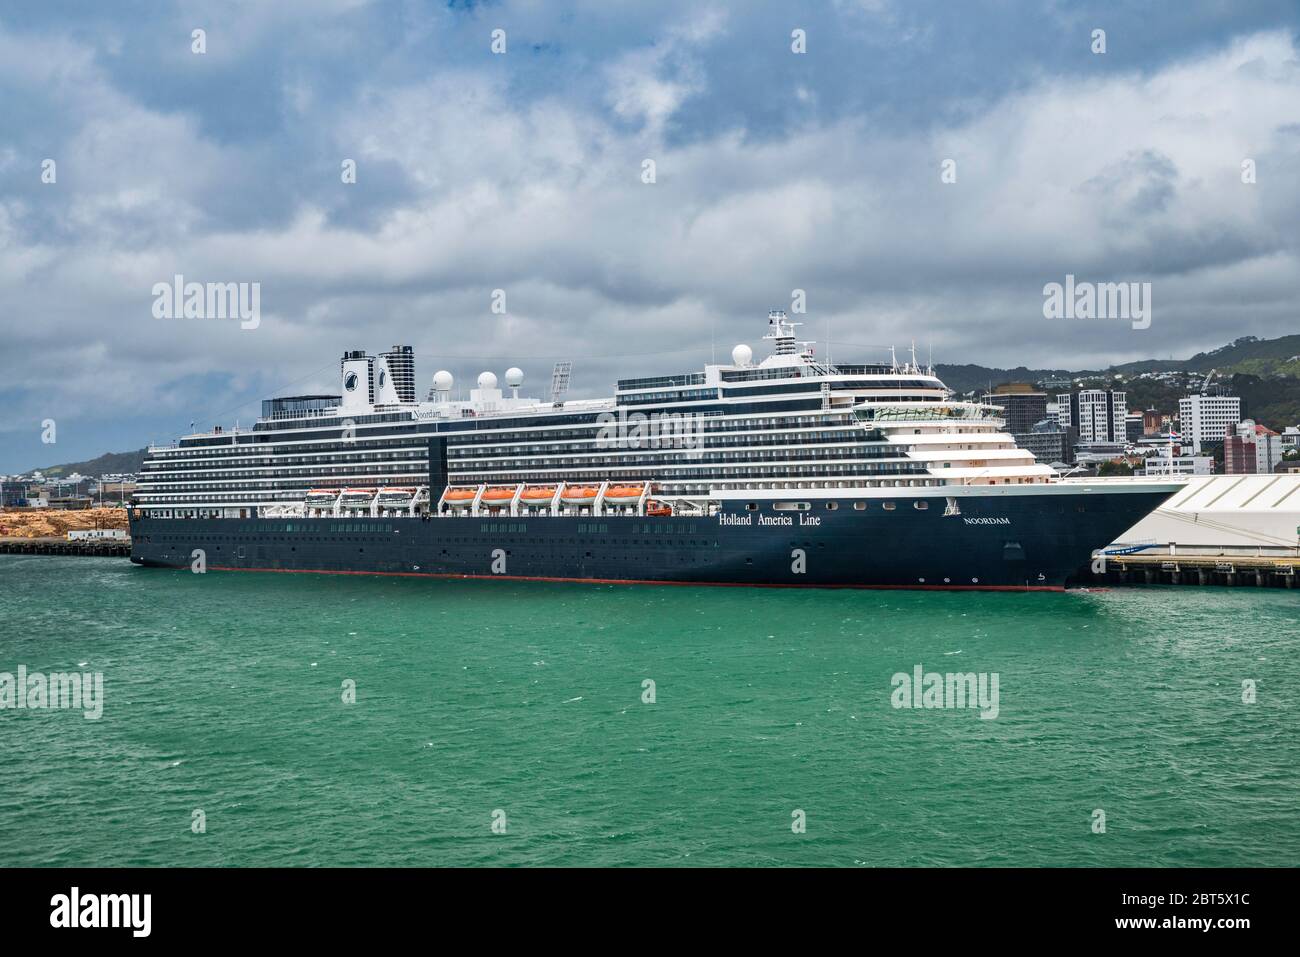 MS Noordam, Holland America Line cruise ship, moored moored under dark clouds at Aotea Quay in Wellington, North Island, New Zealand Stock Photo